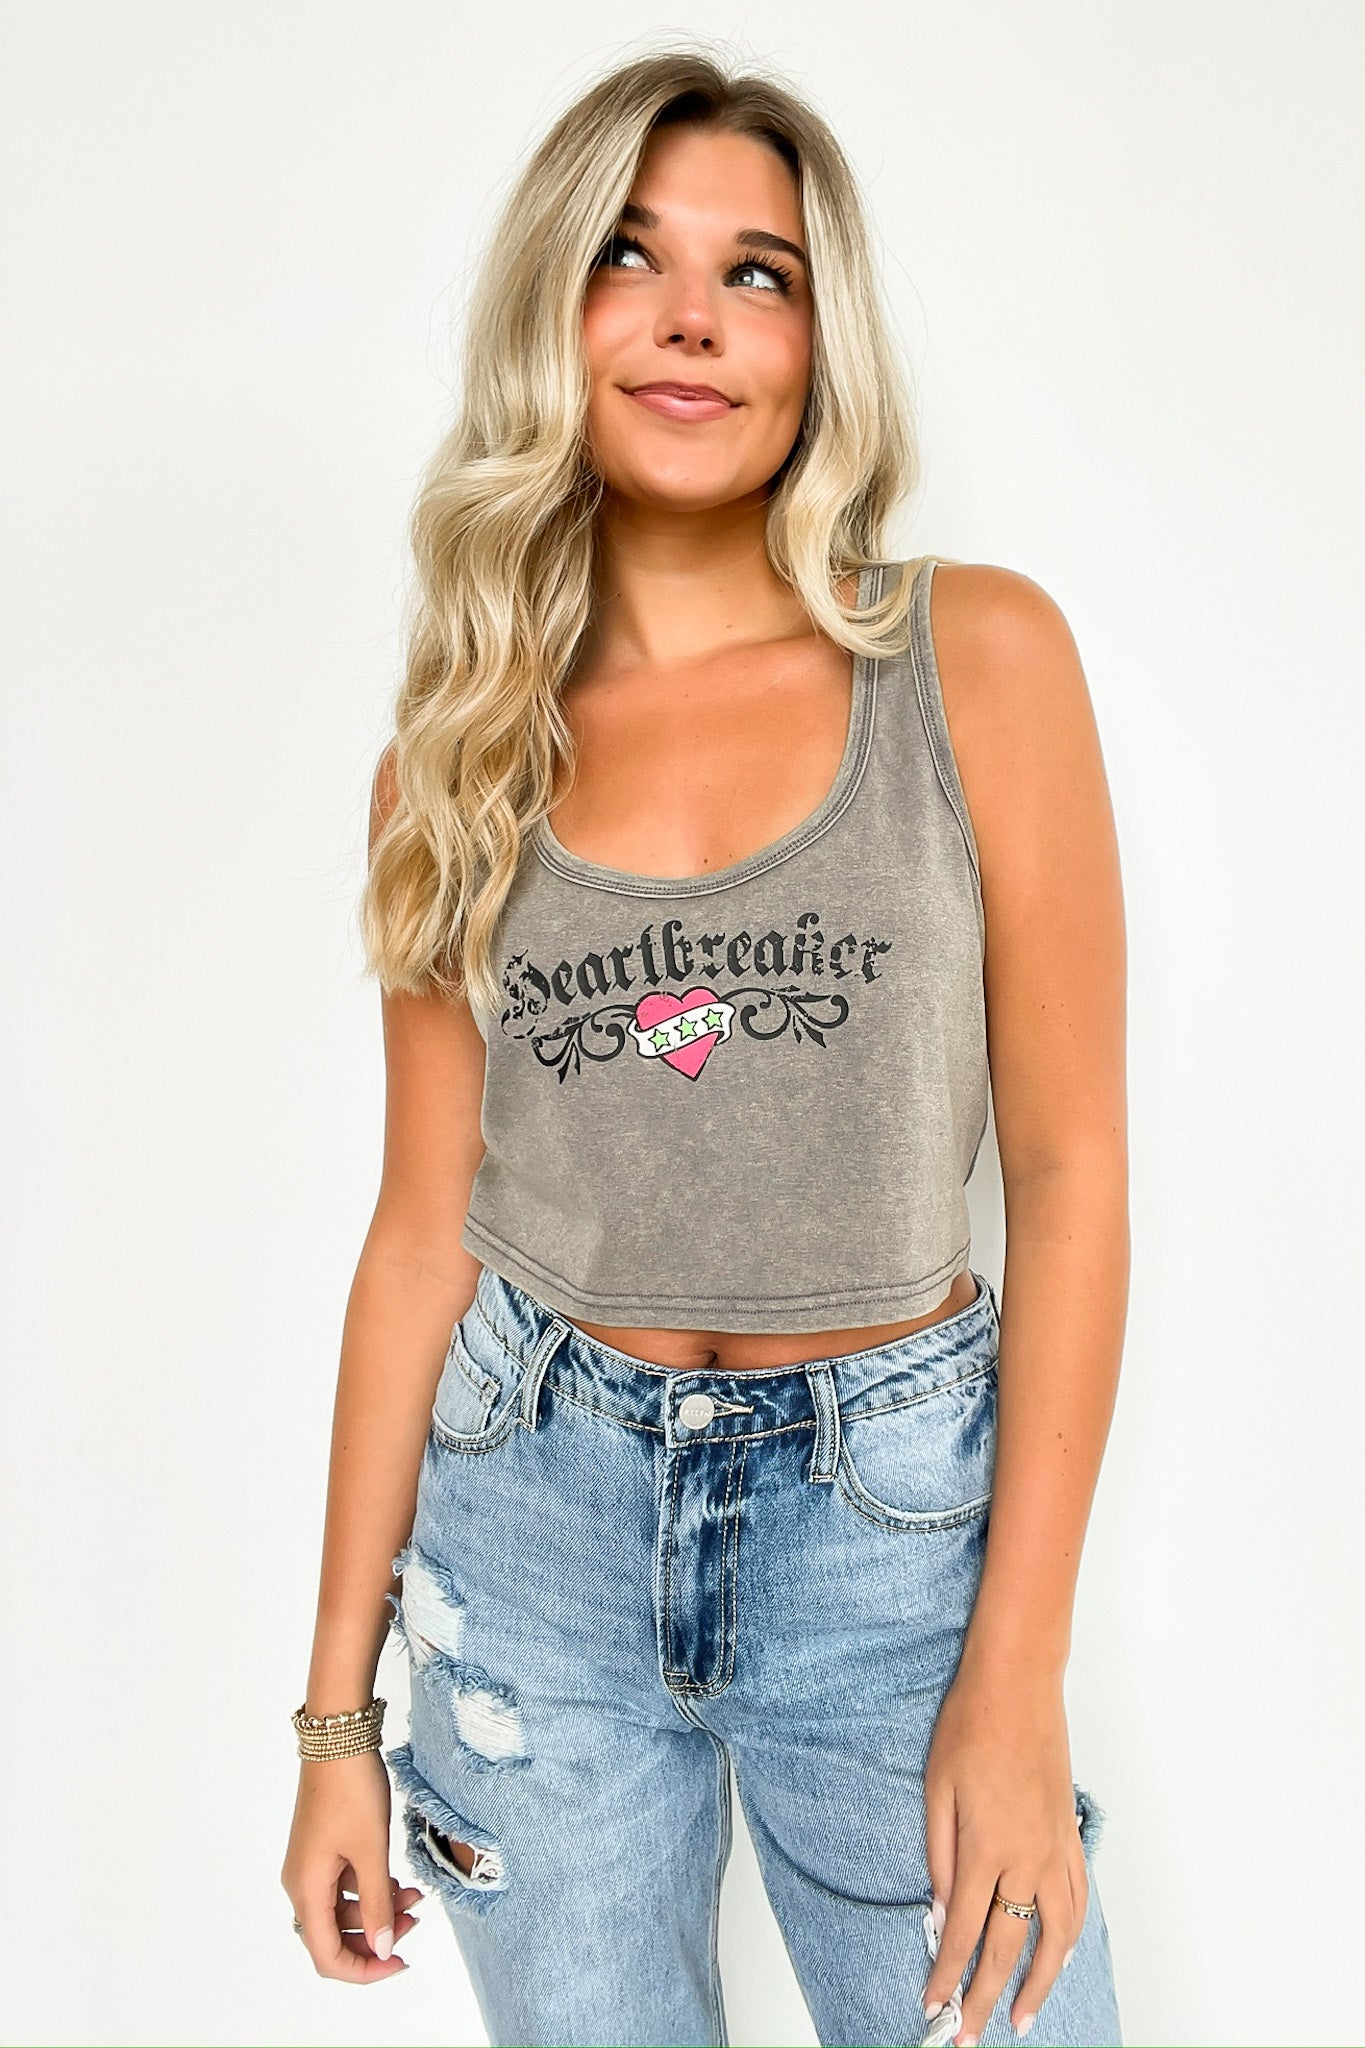  Heartbreaker Vintage Graphic Tank Top - Madison and Mallory